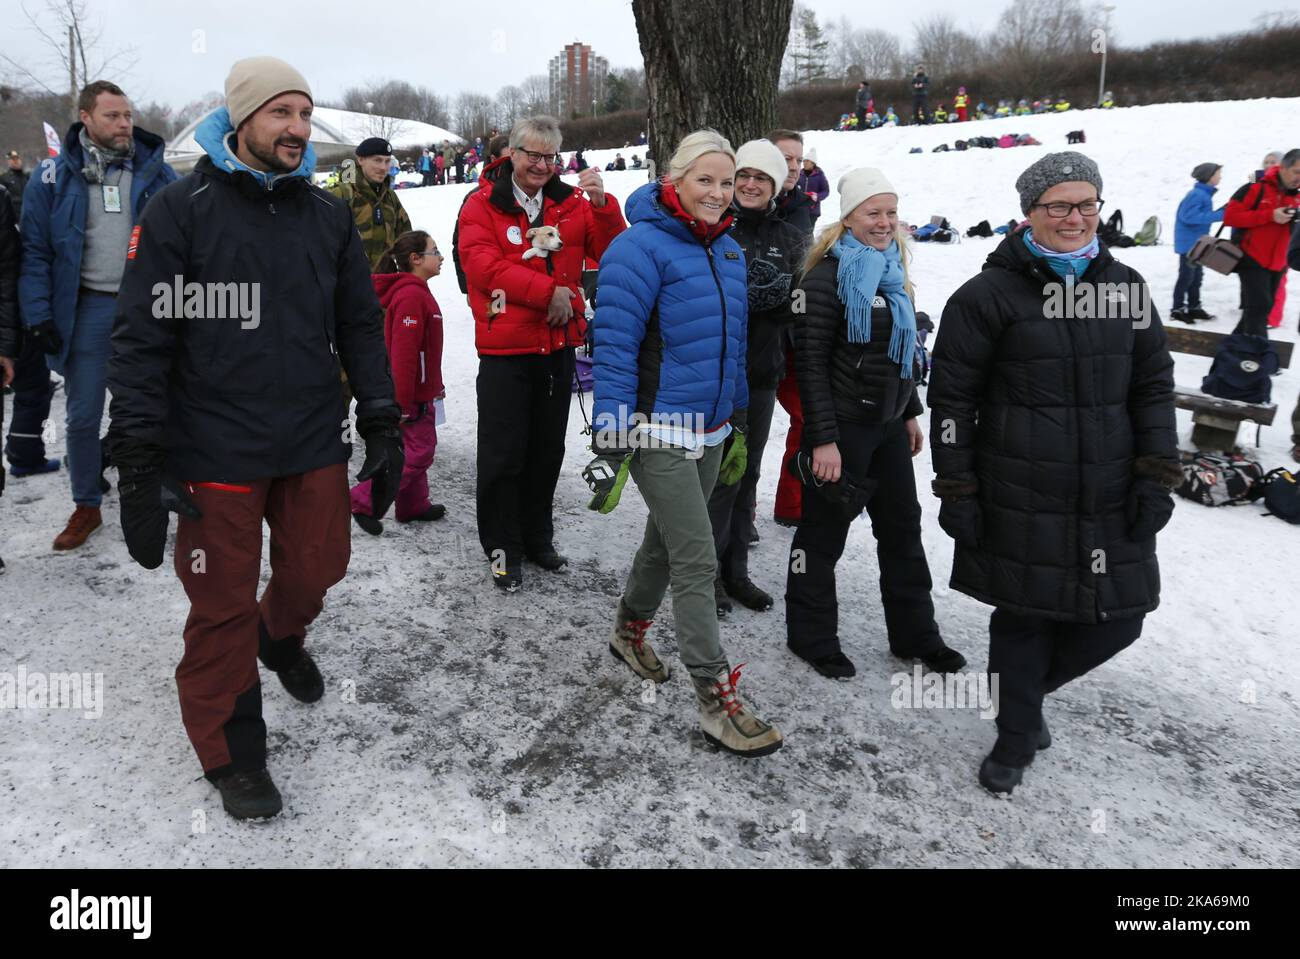 Oslo, Norway 20150113. The Royal Crown Prince Couple visit Toyenparken in Oslo on Tuesday for the opening of the Outdoor Recreation Year 2015 (Friluftlivets aar). 1600 children an youth attended the opening. Crown Prince Haakon and Crown Princess Mette-Marit in the park with mayor Fabian Stang (in red with his puppy). Photo: Lise Aserud / NTB scanpix Stock Photo